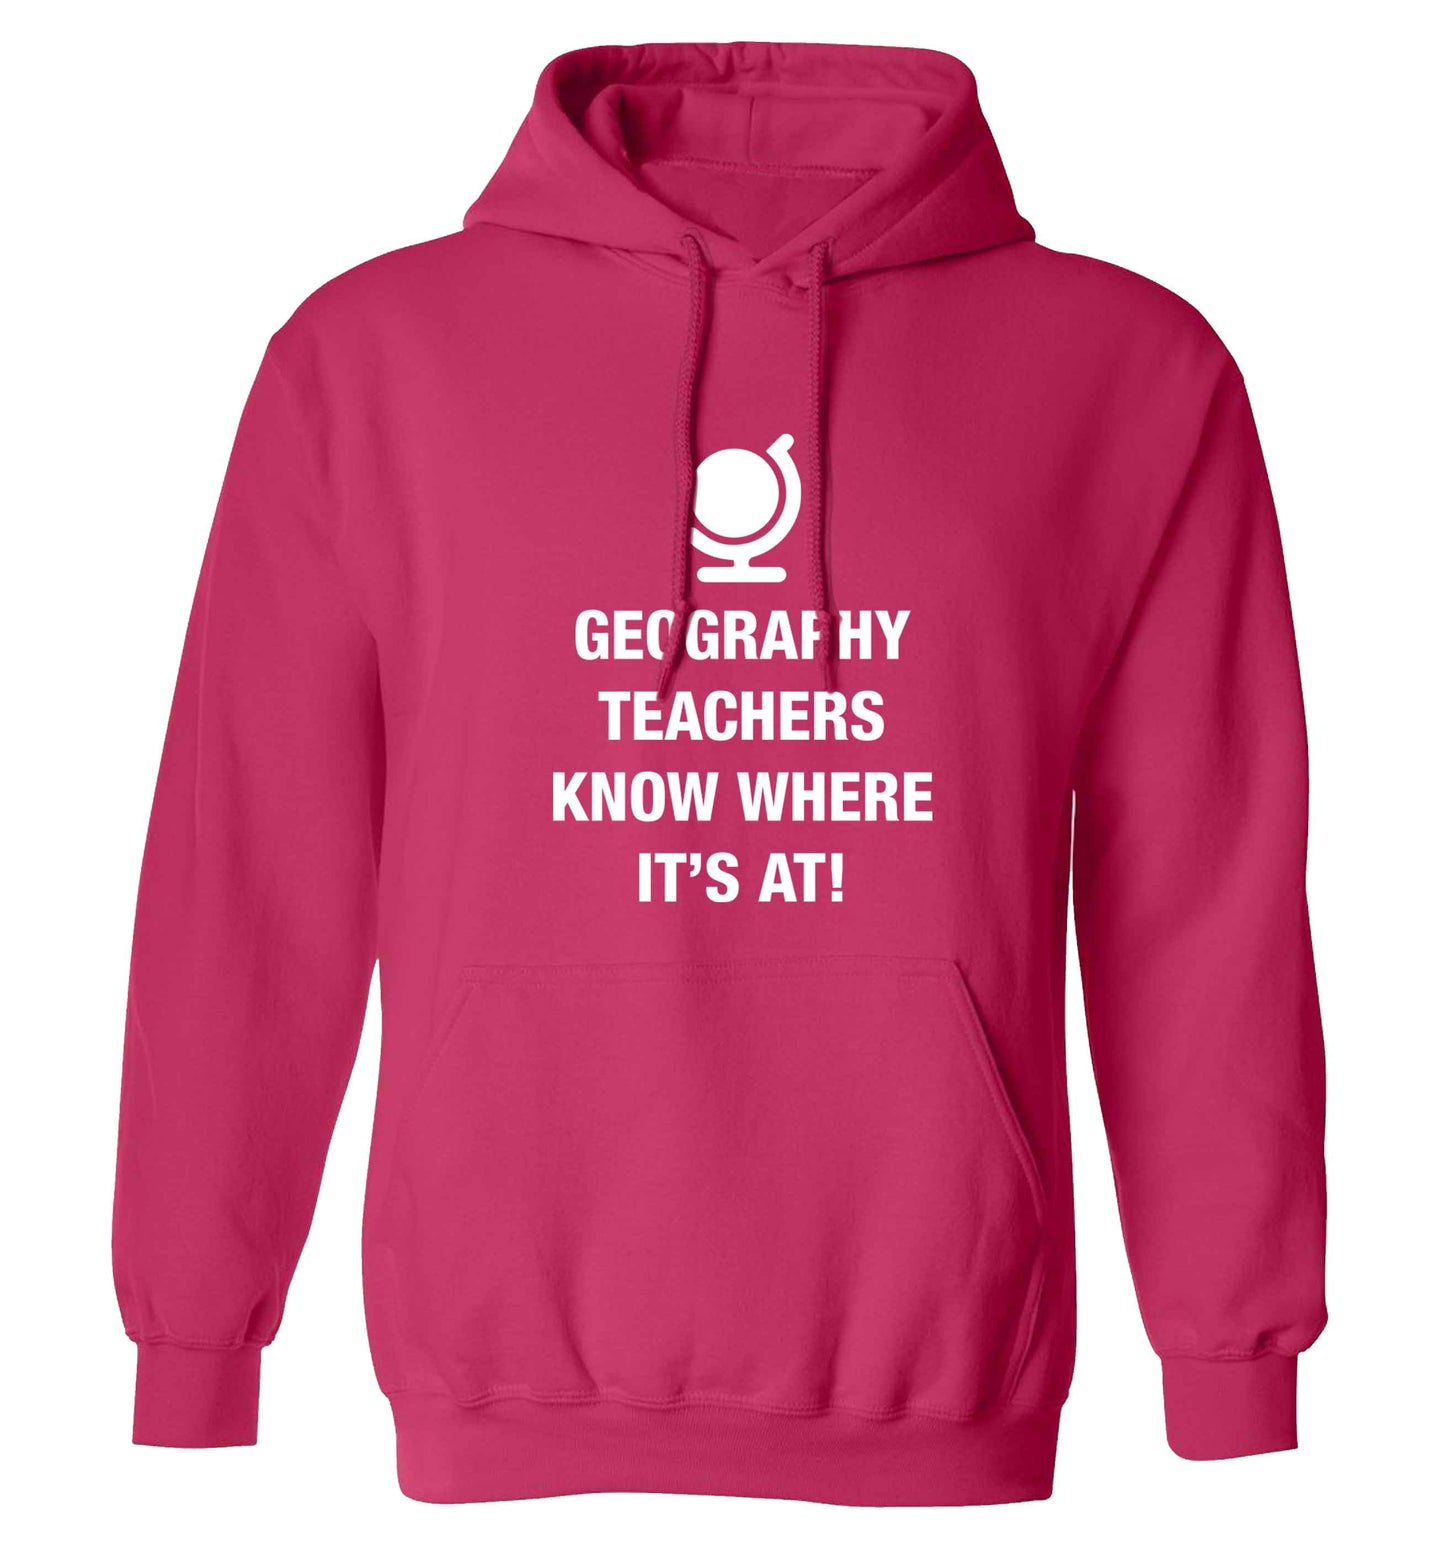 Geography teachers know where it's at adults unisex pink hoodie 2XL